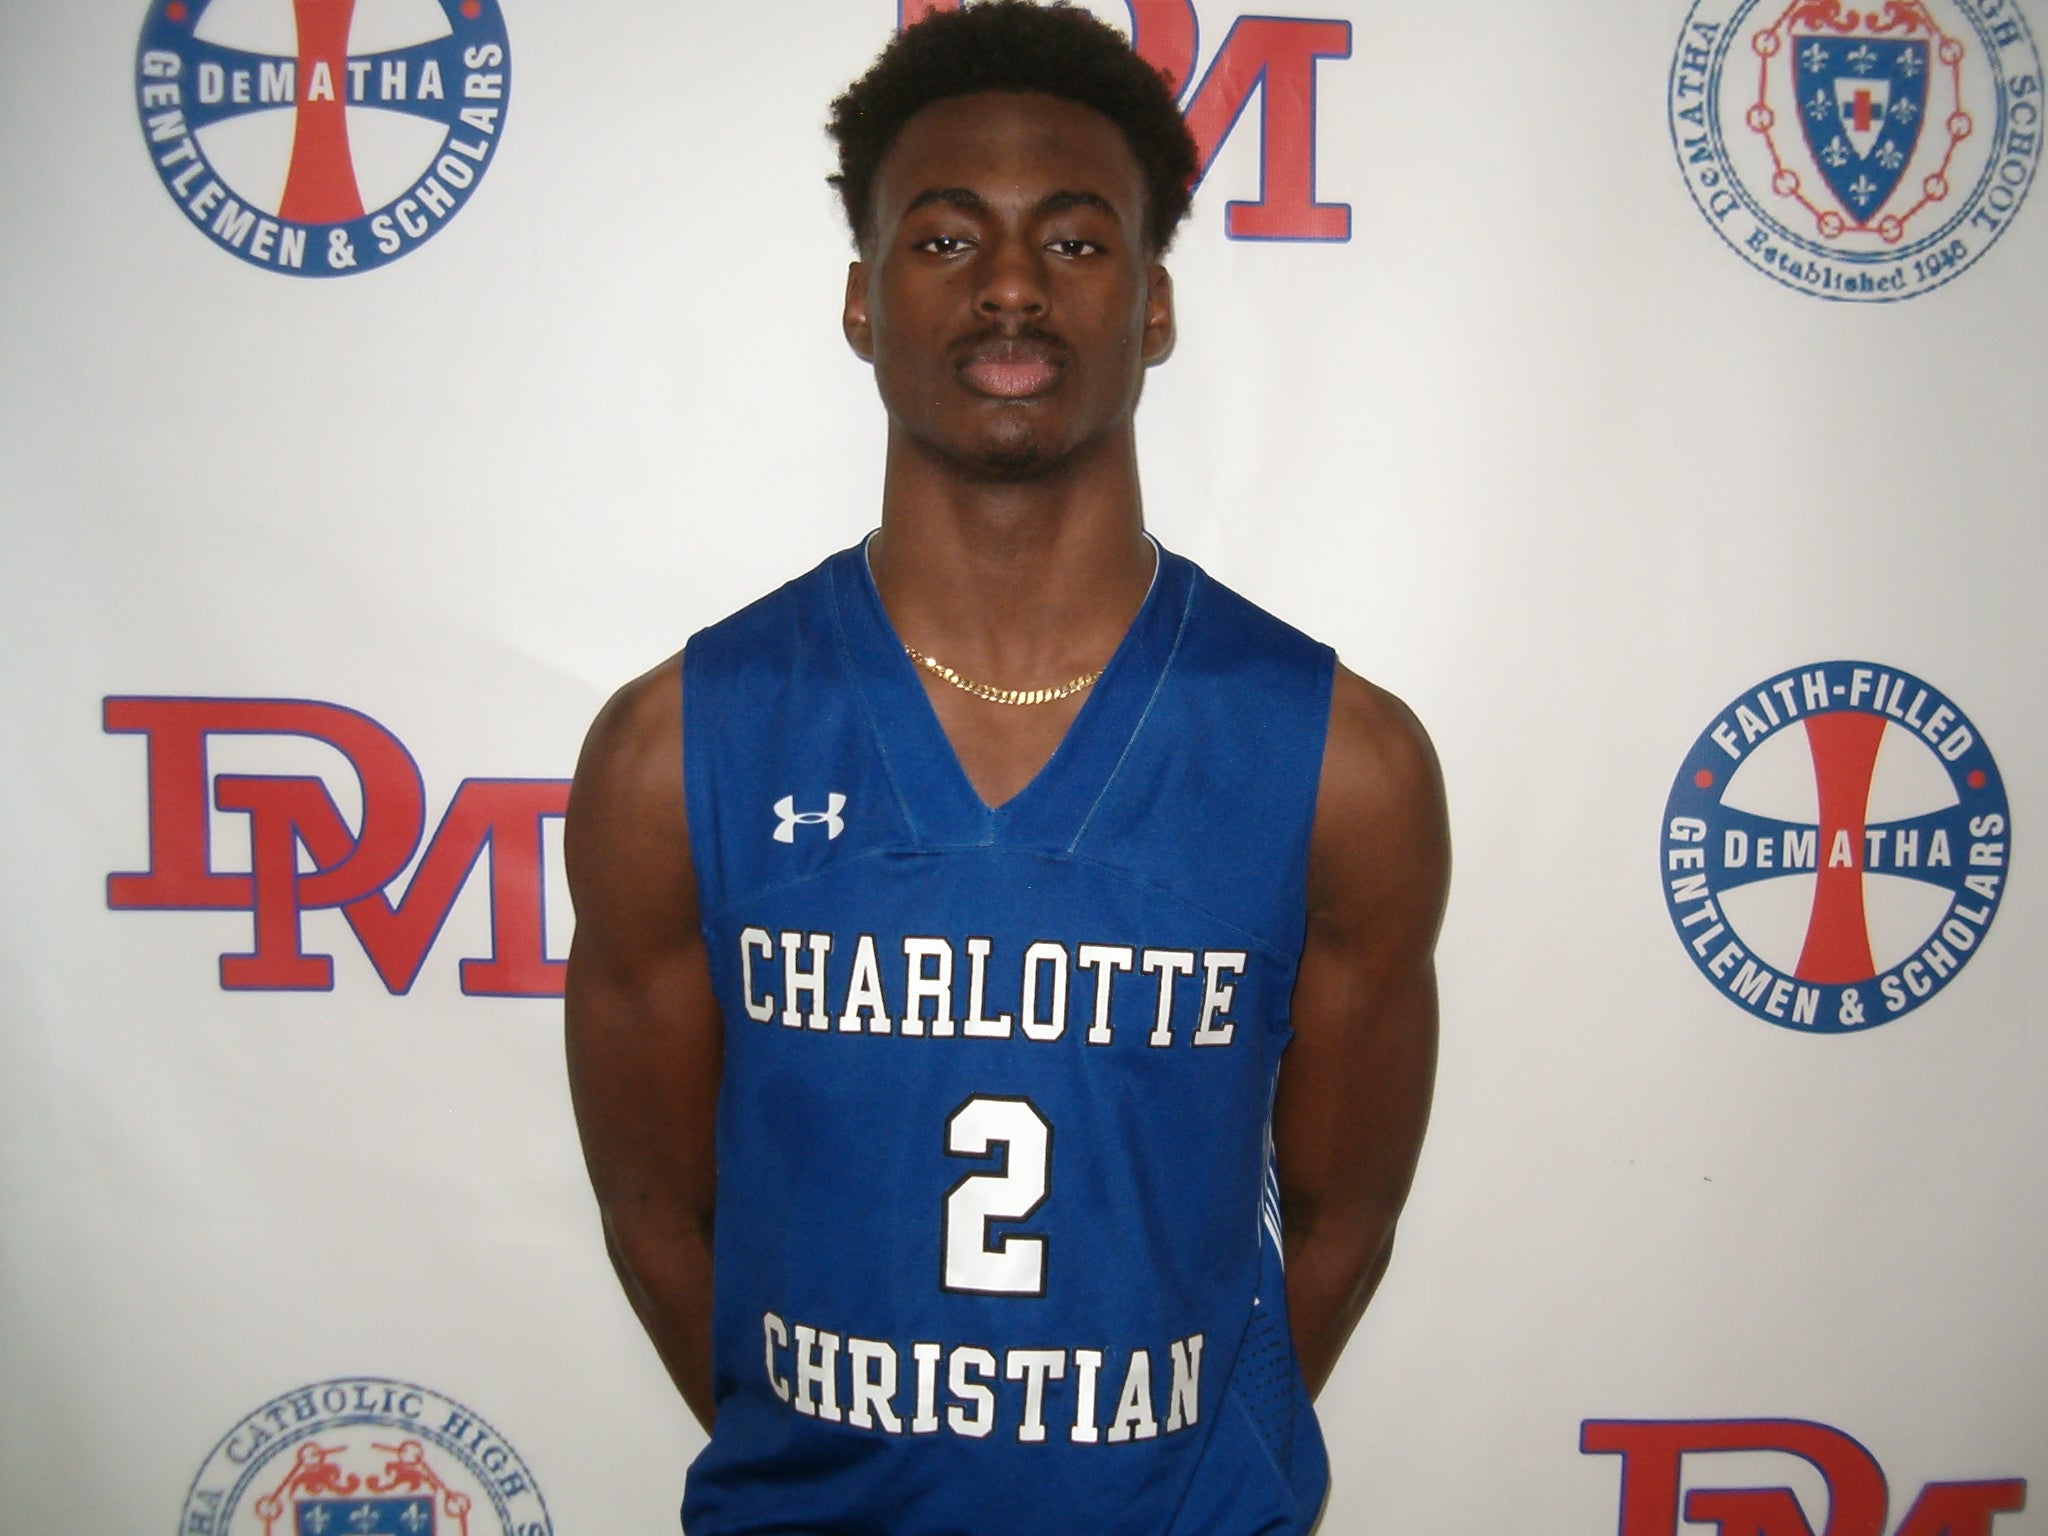 Charlotte Christian takes 3rd place in DeMatha Christmas Tourney